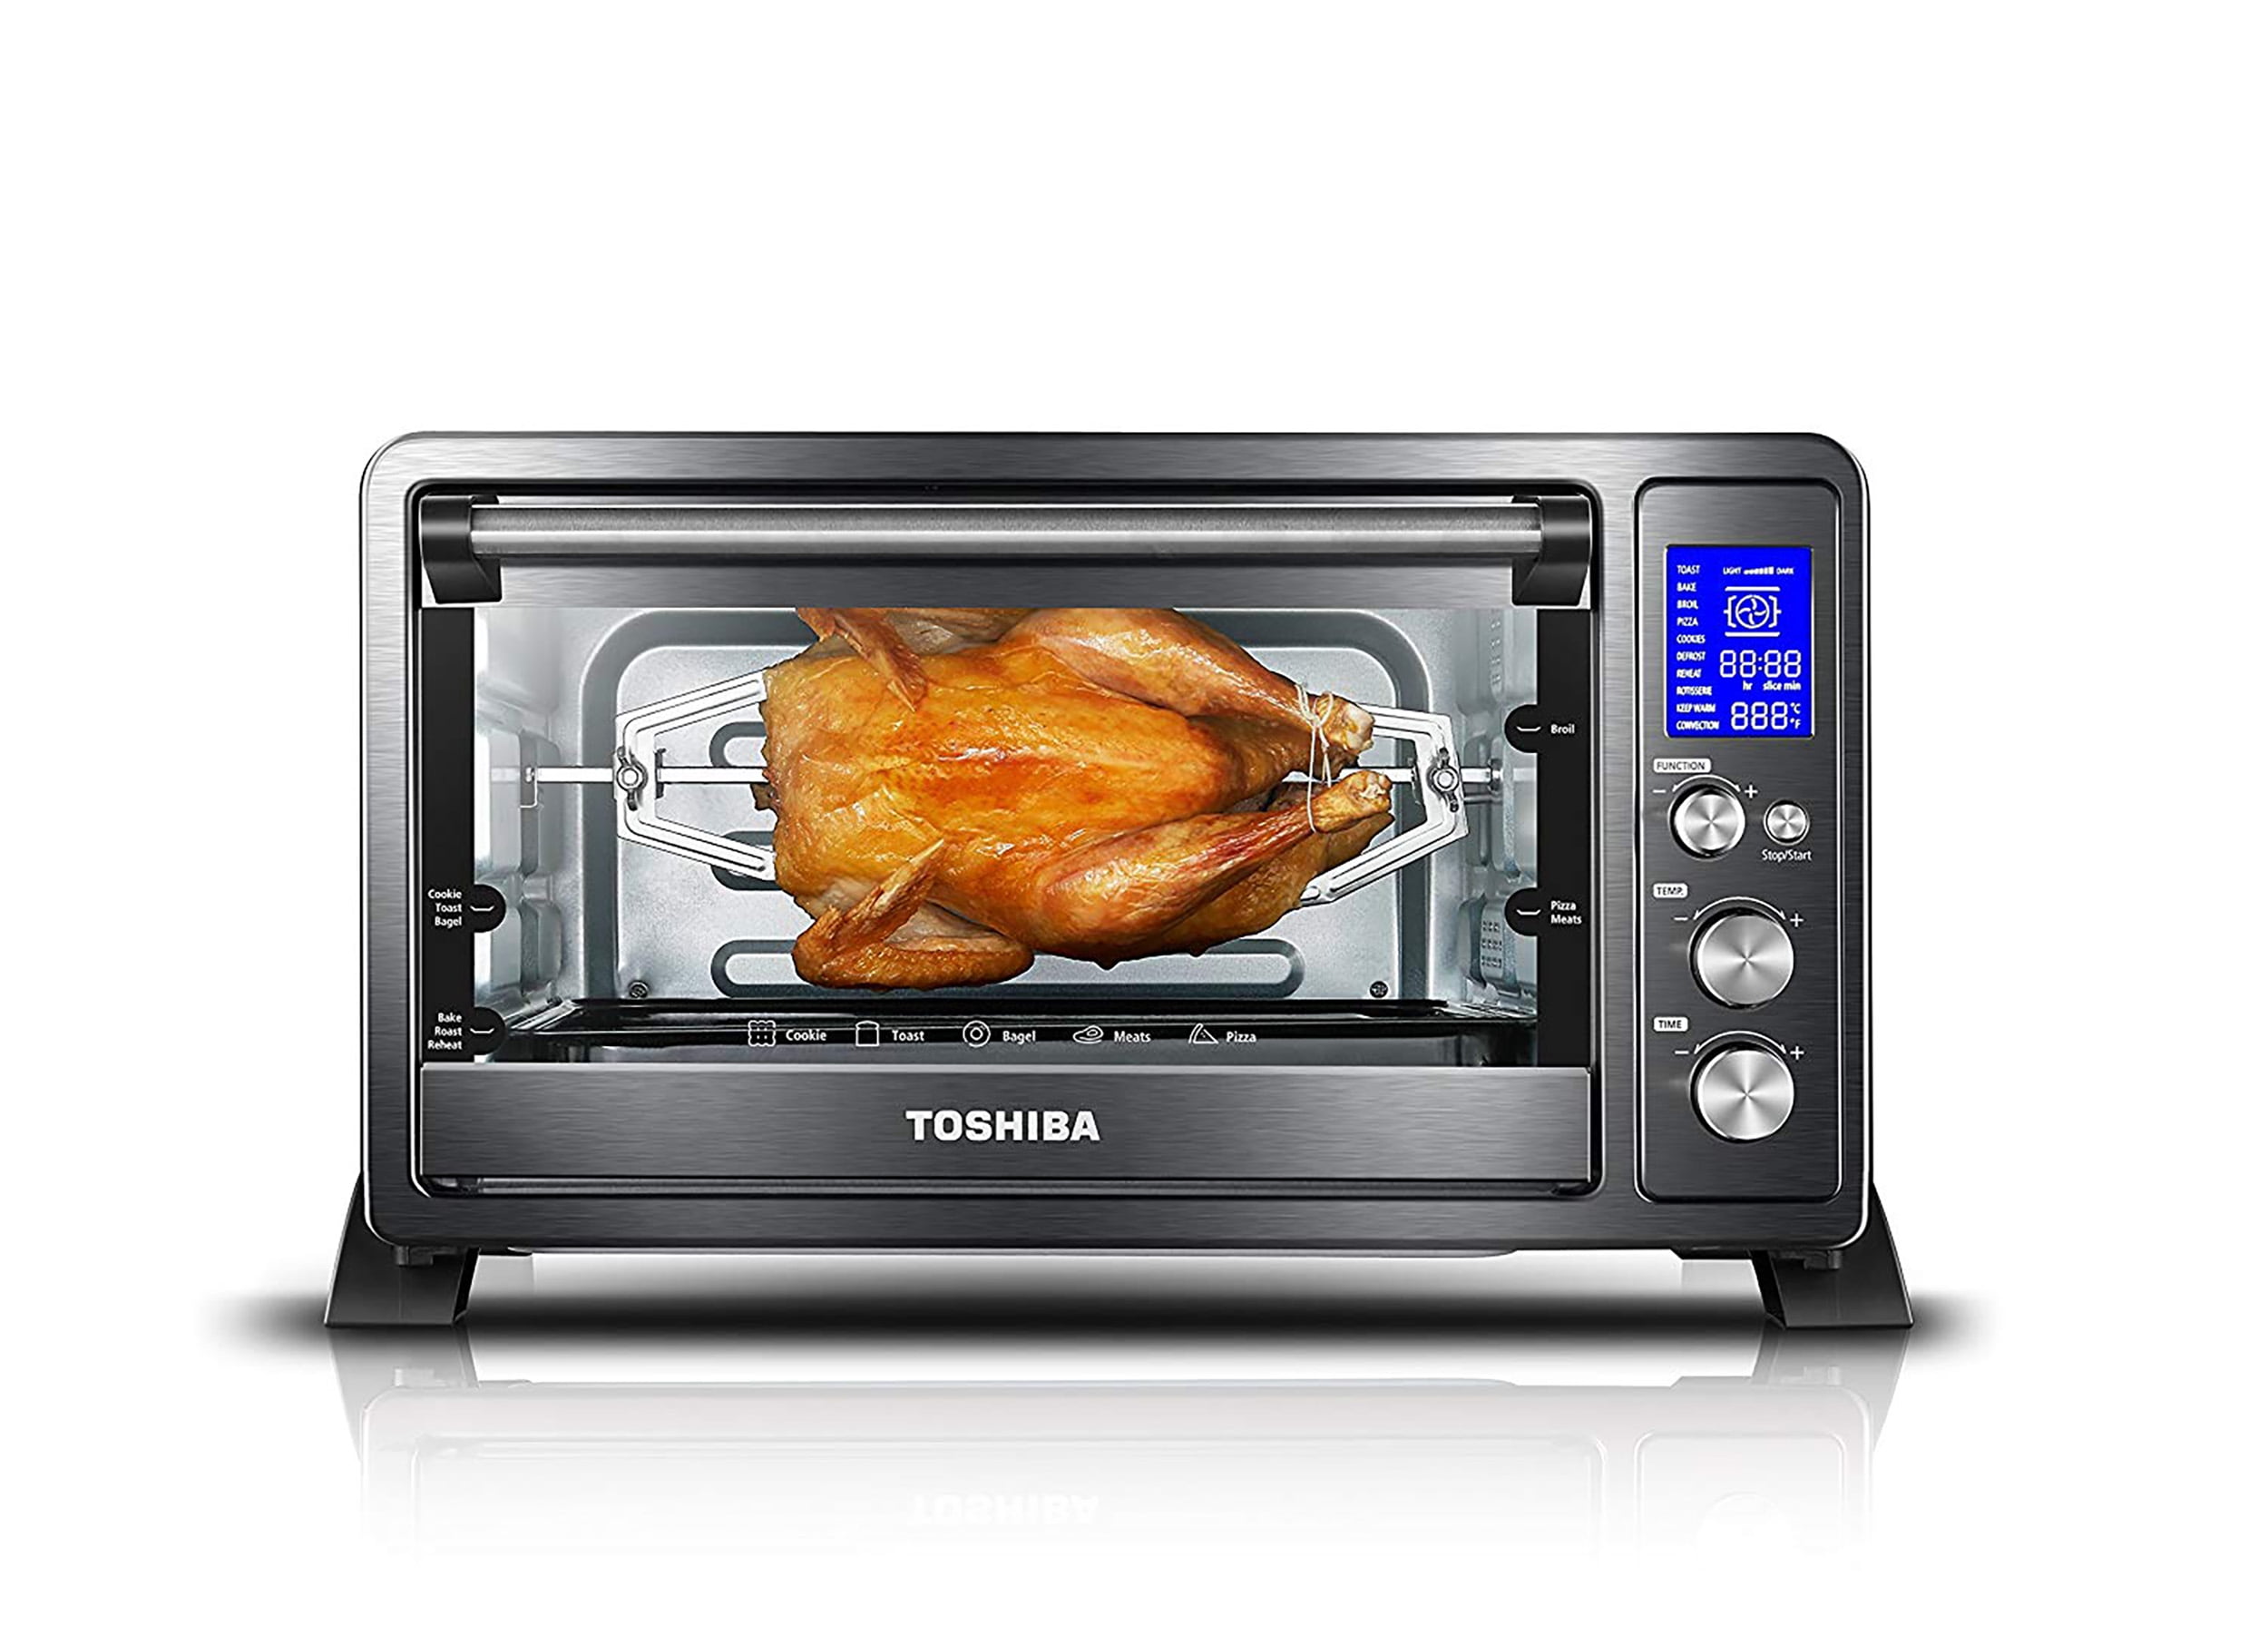 Toshiba AC25CEW-CHBS Digital Convection Toaster Oven, Black Stainless 